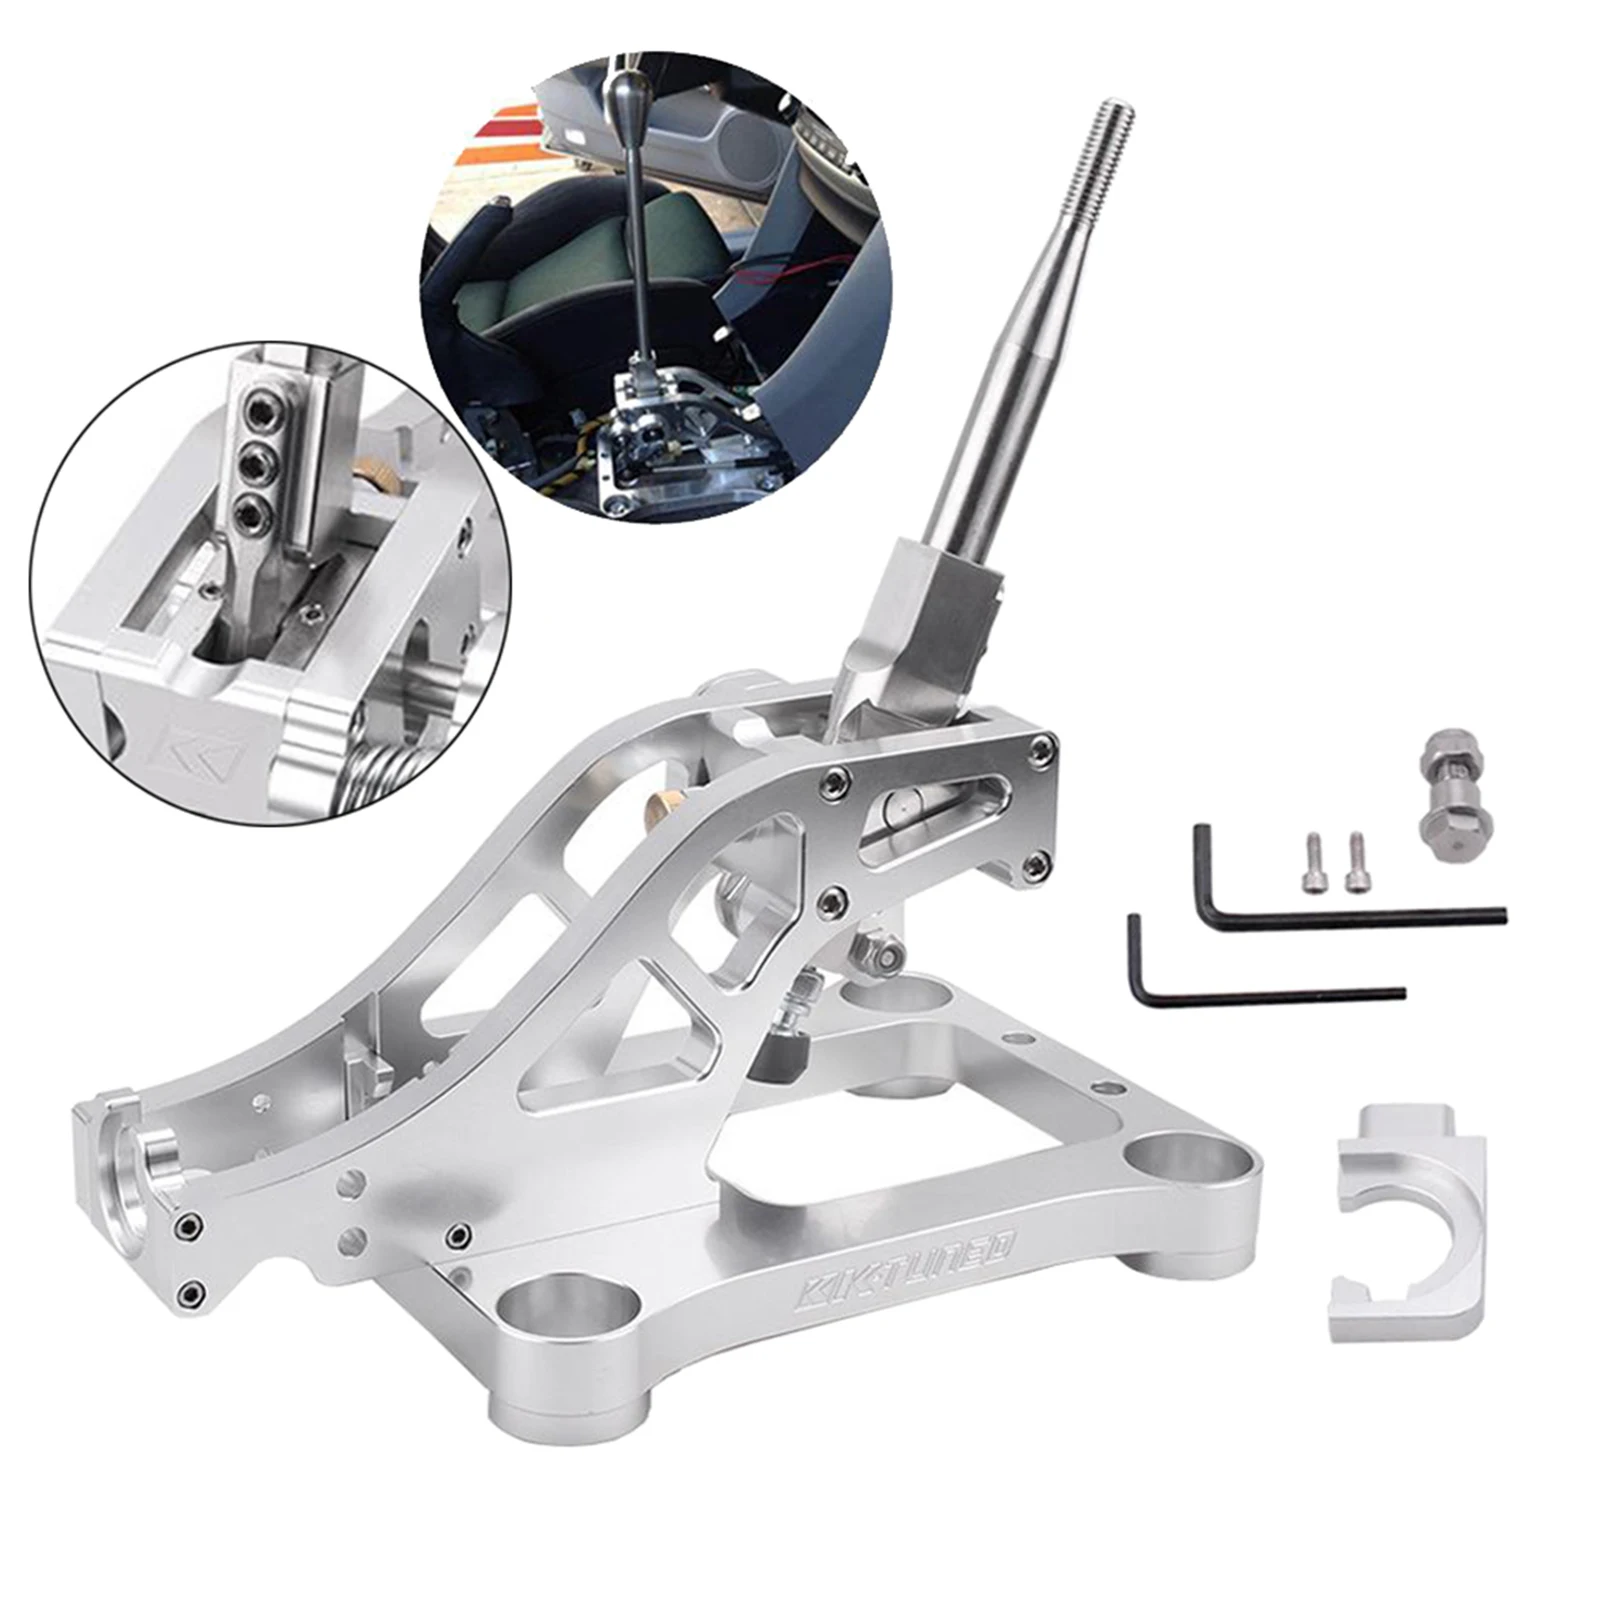 Billet Shifter Box Assembly for Accord CL7 CL9 03-07 TSX CL TL UA 04-08, less expensive, Easy installation